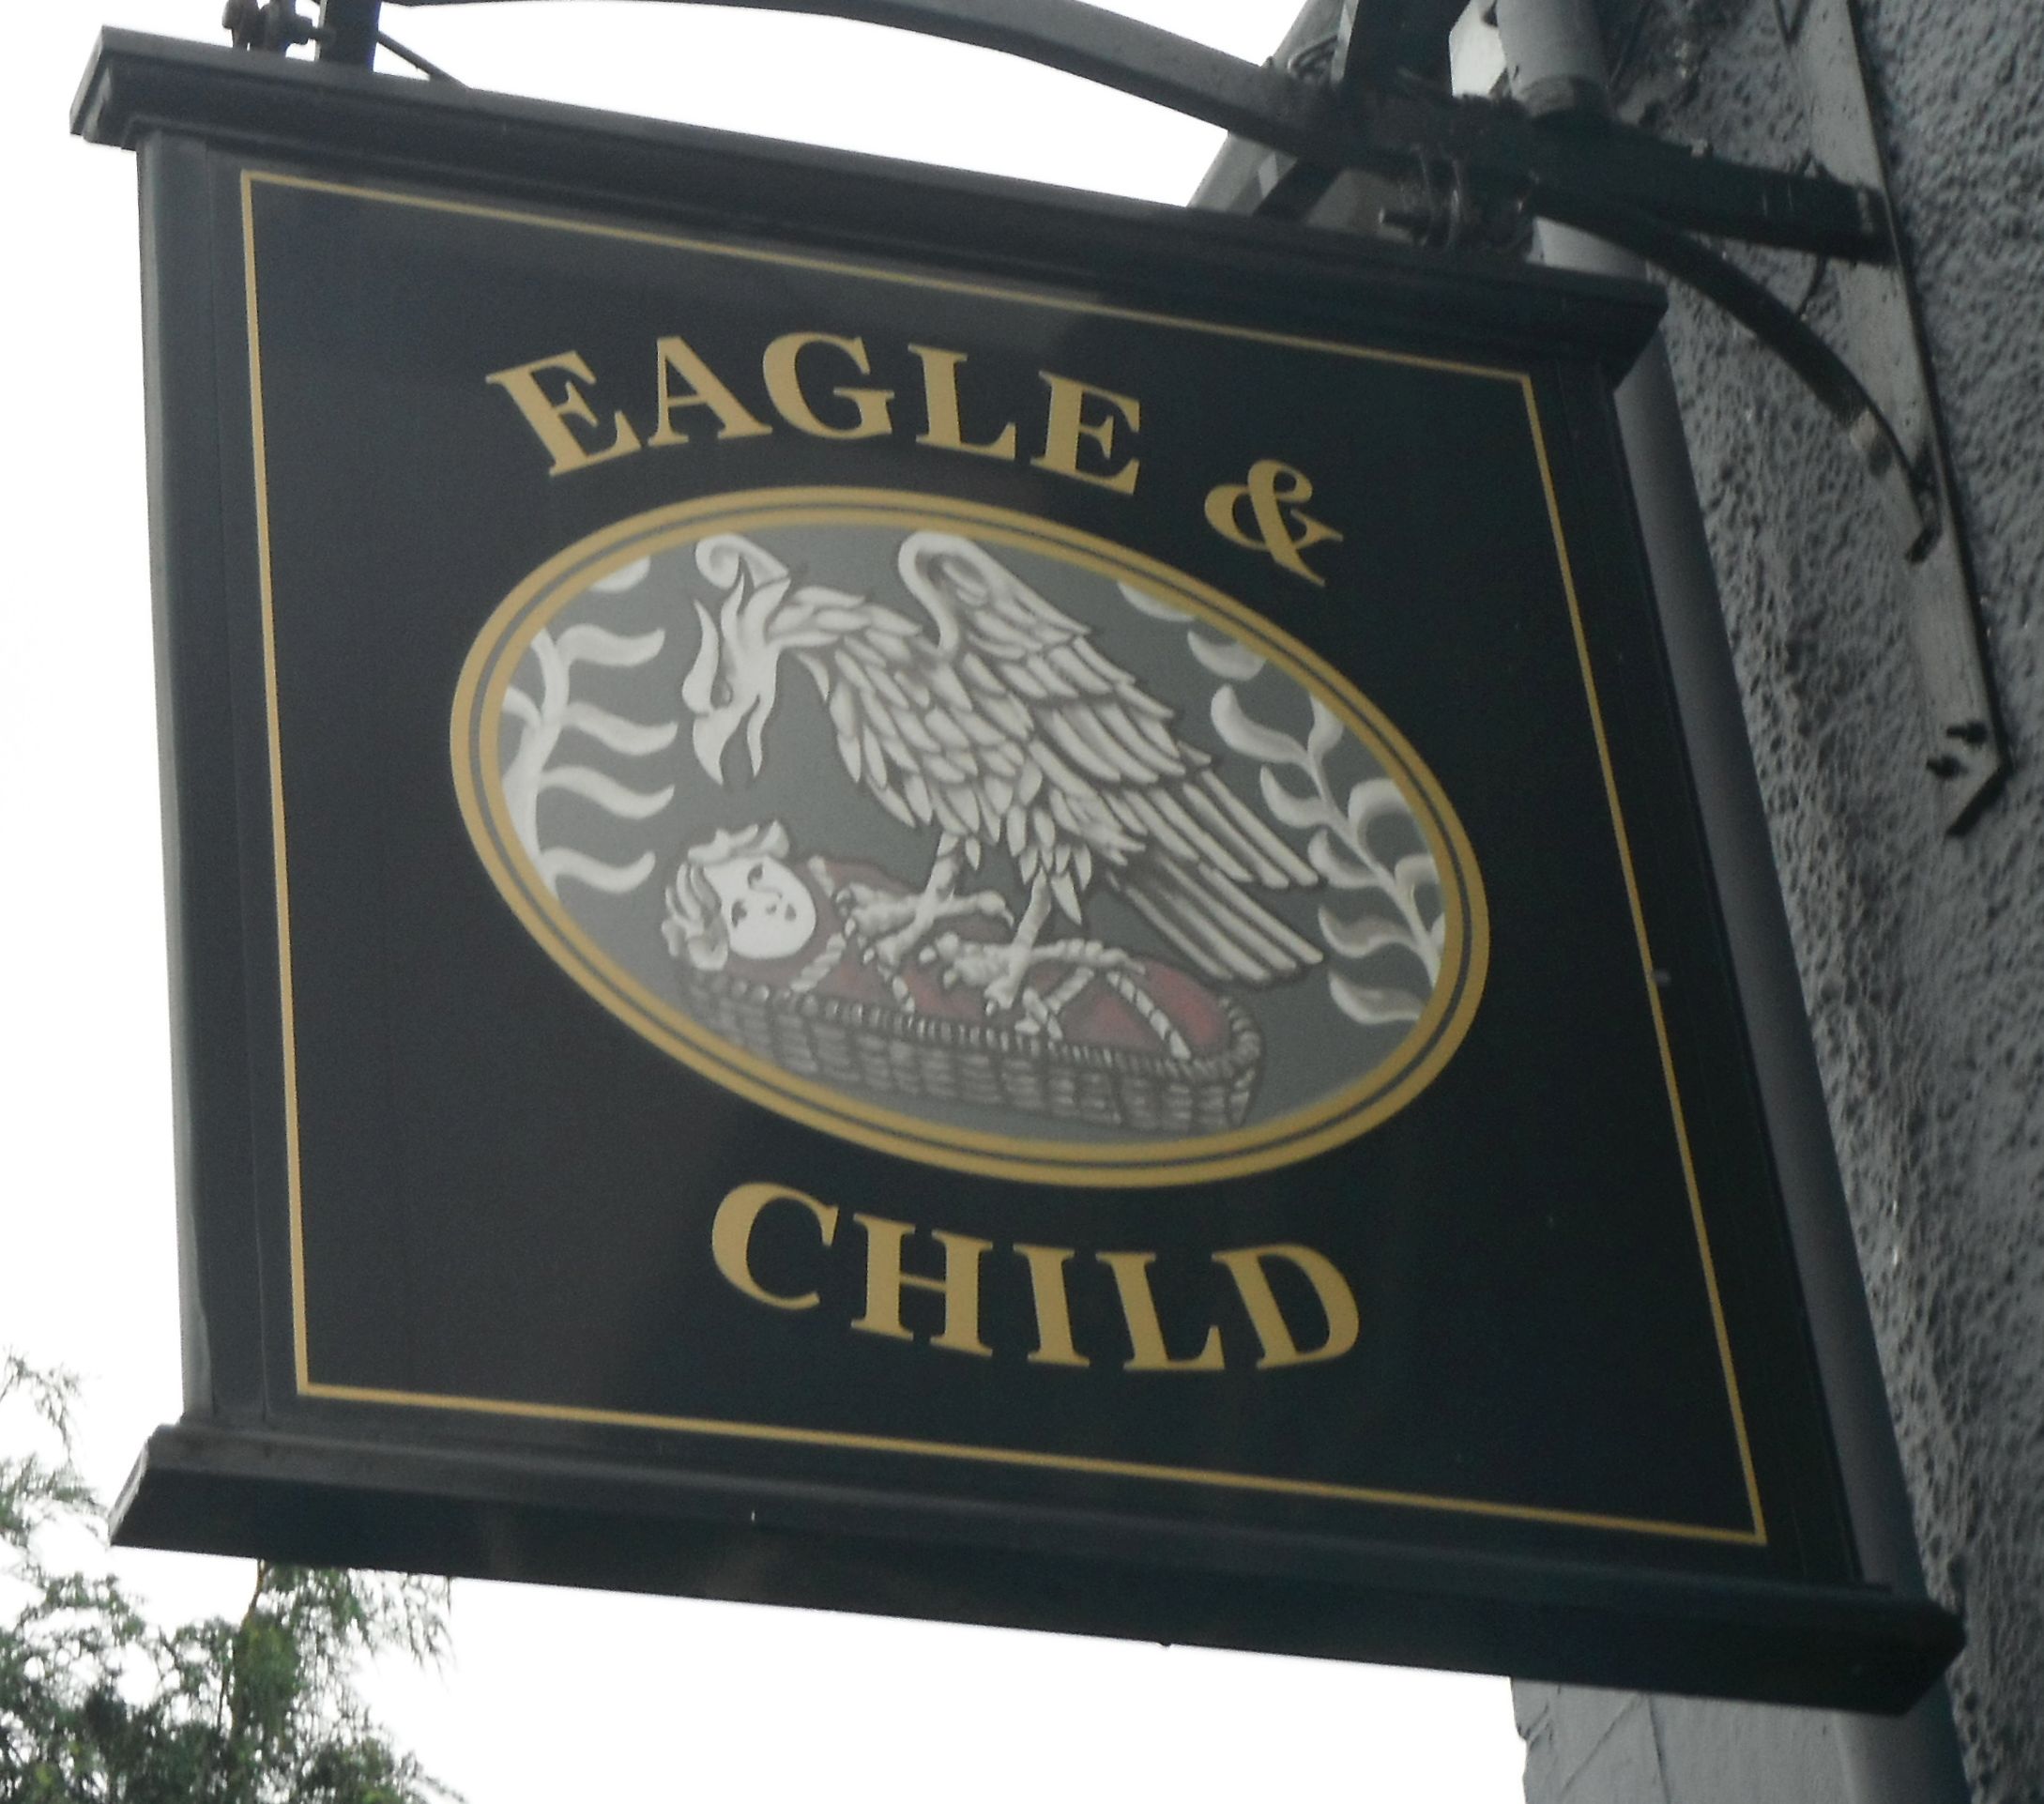 Photo taken by me – the Pub Sign for The Eagle And Child  Ashton-In-Makerfield Lancashire